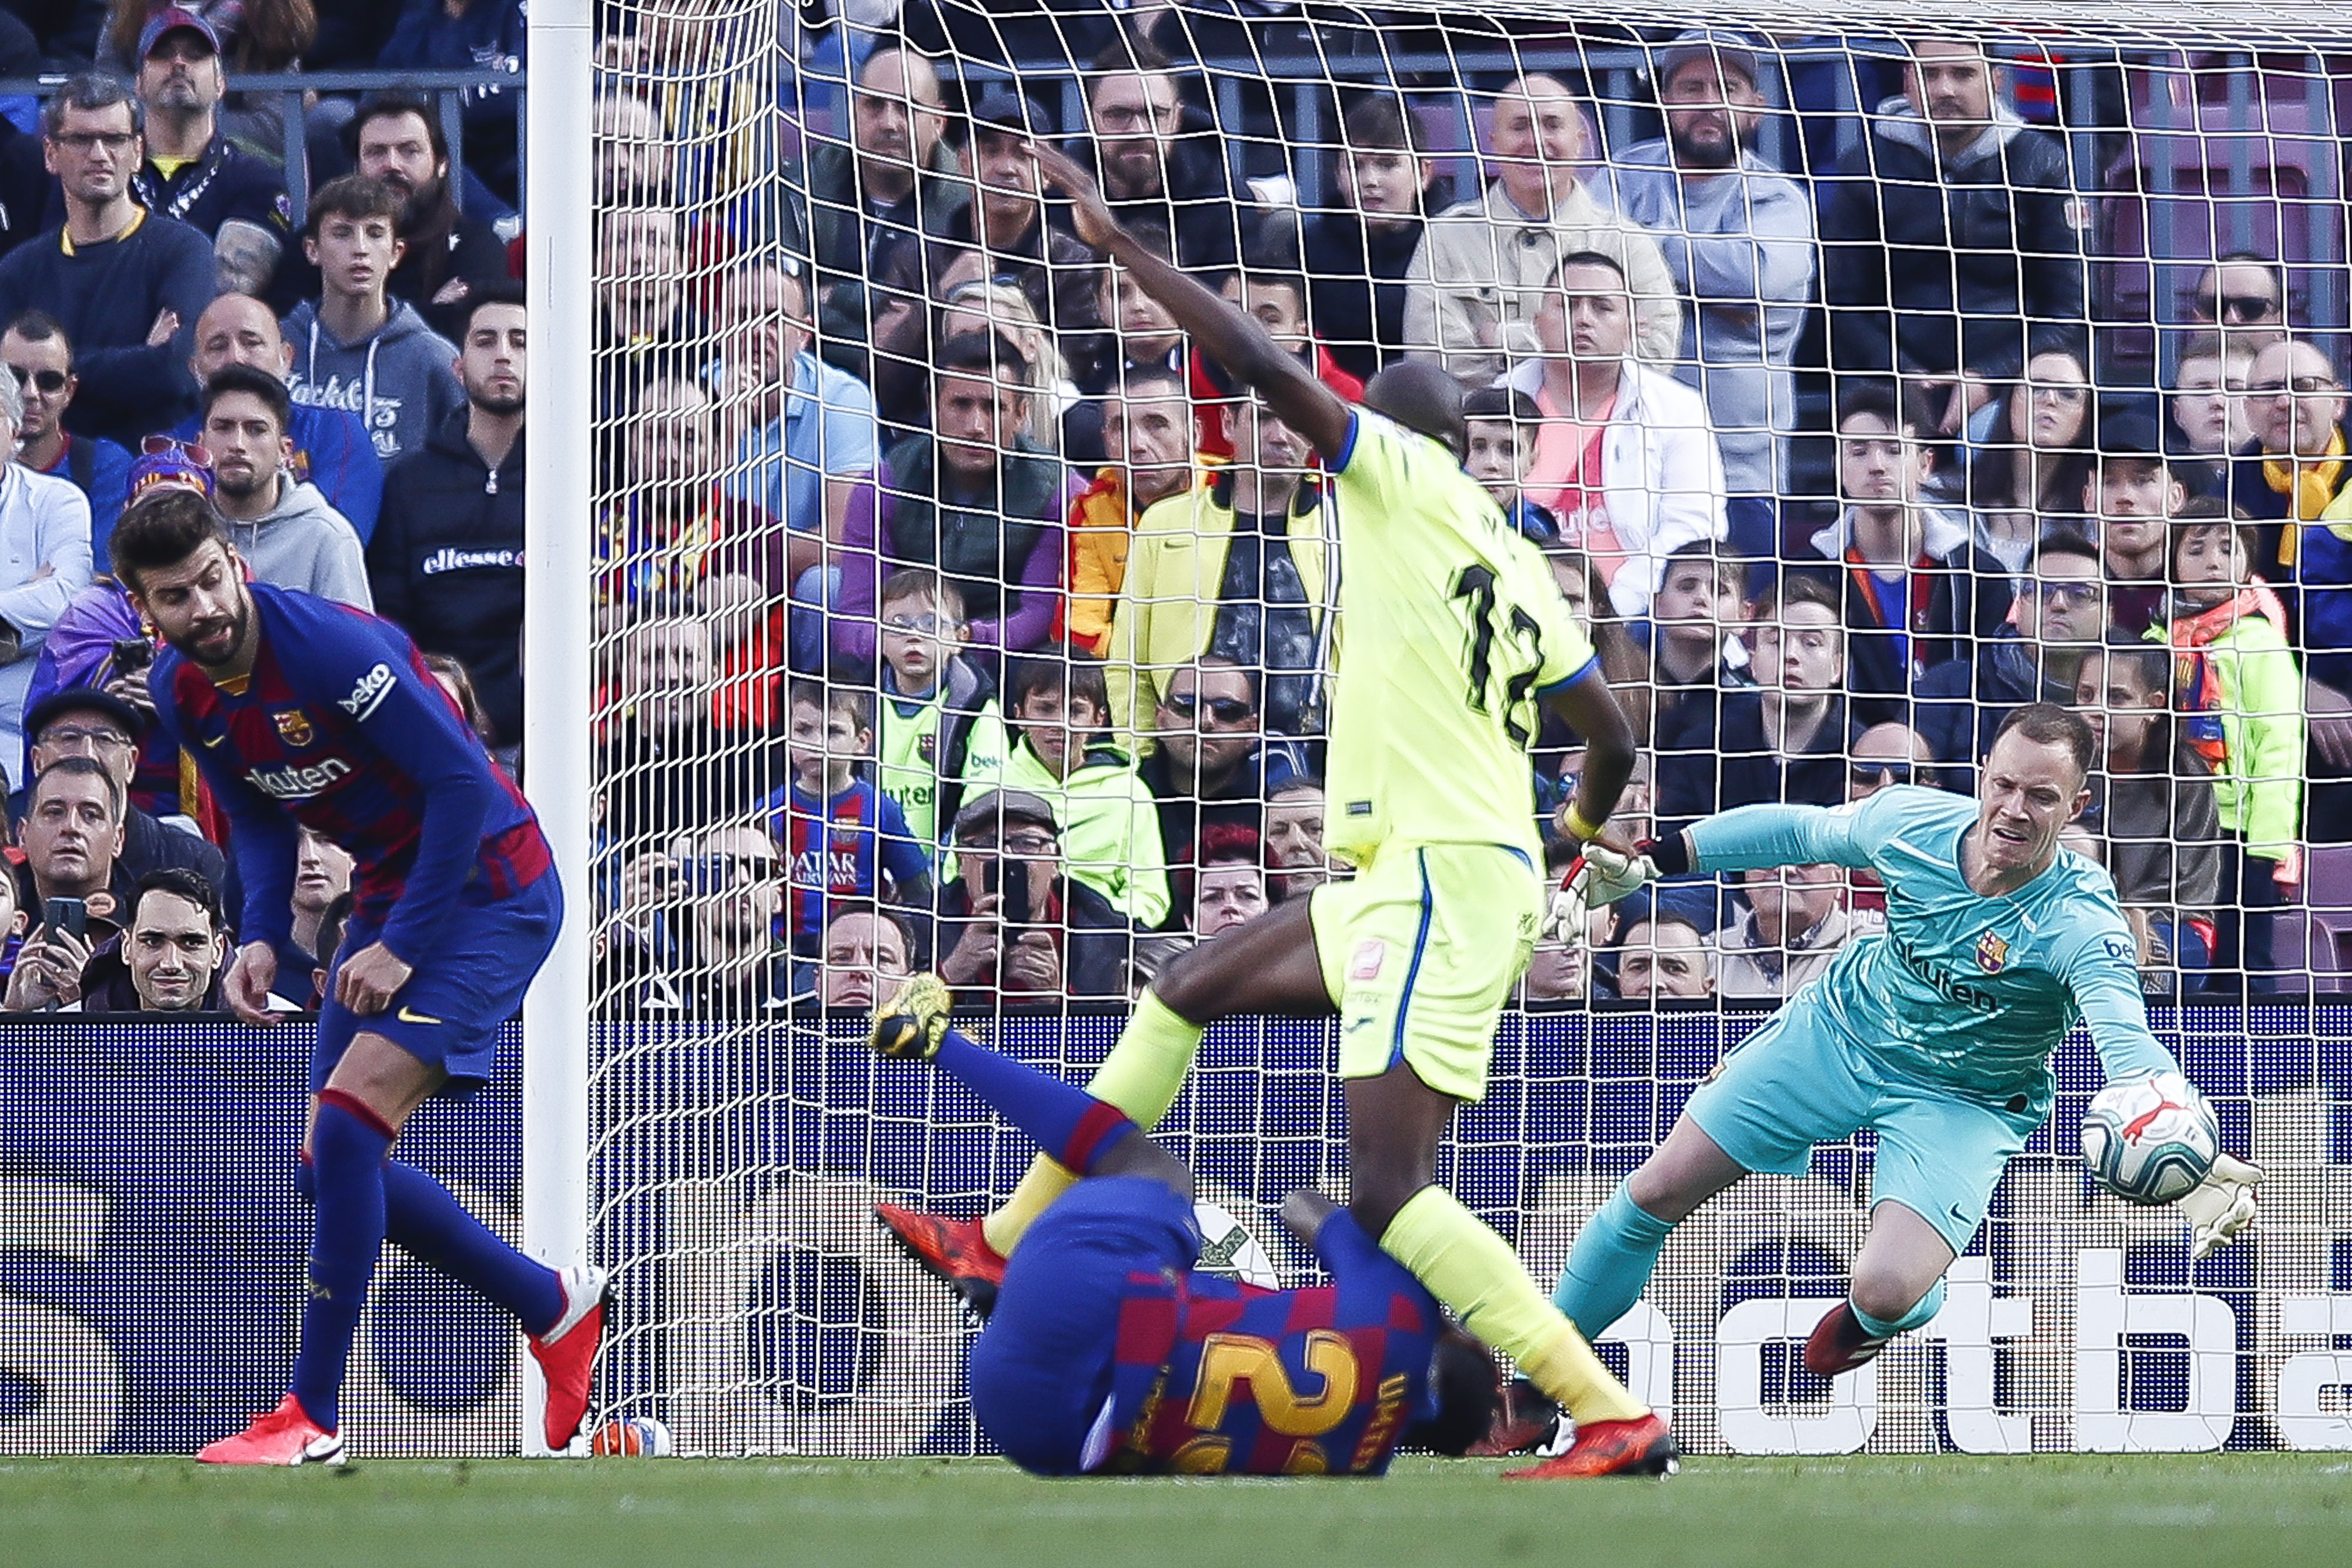 ter Stegen made a great double save in the second half (Photo by Eric Alonso/Getty Images)